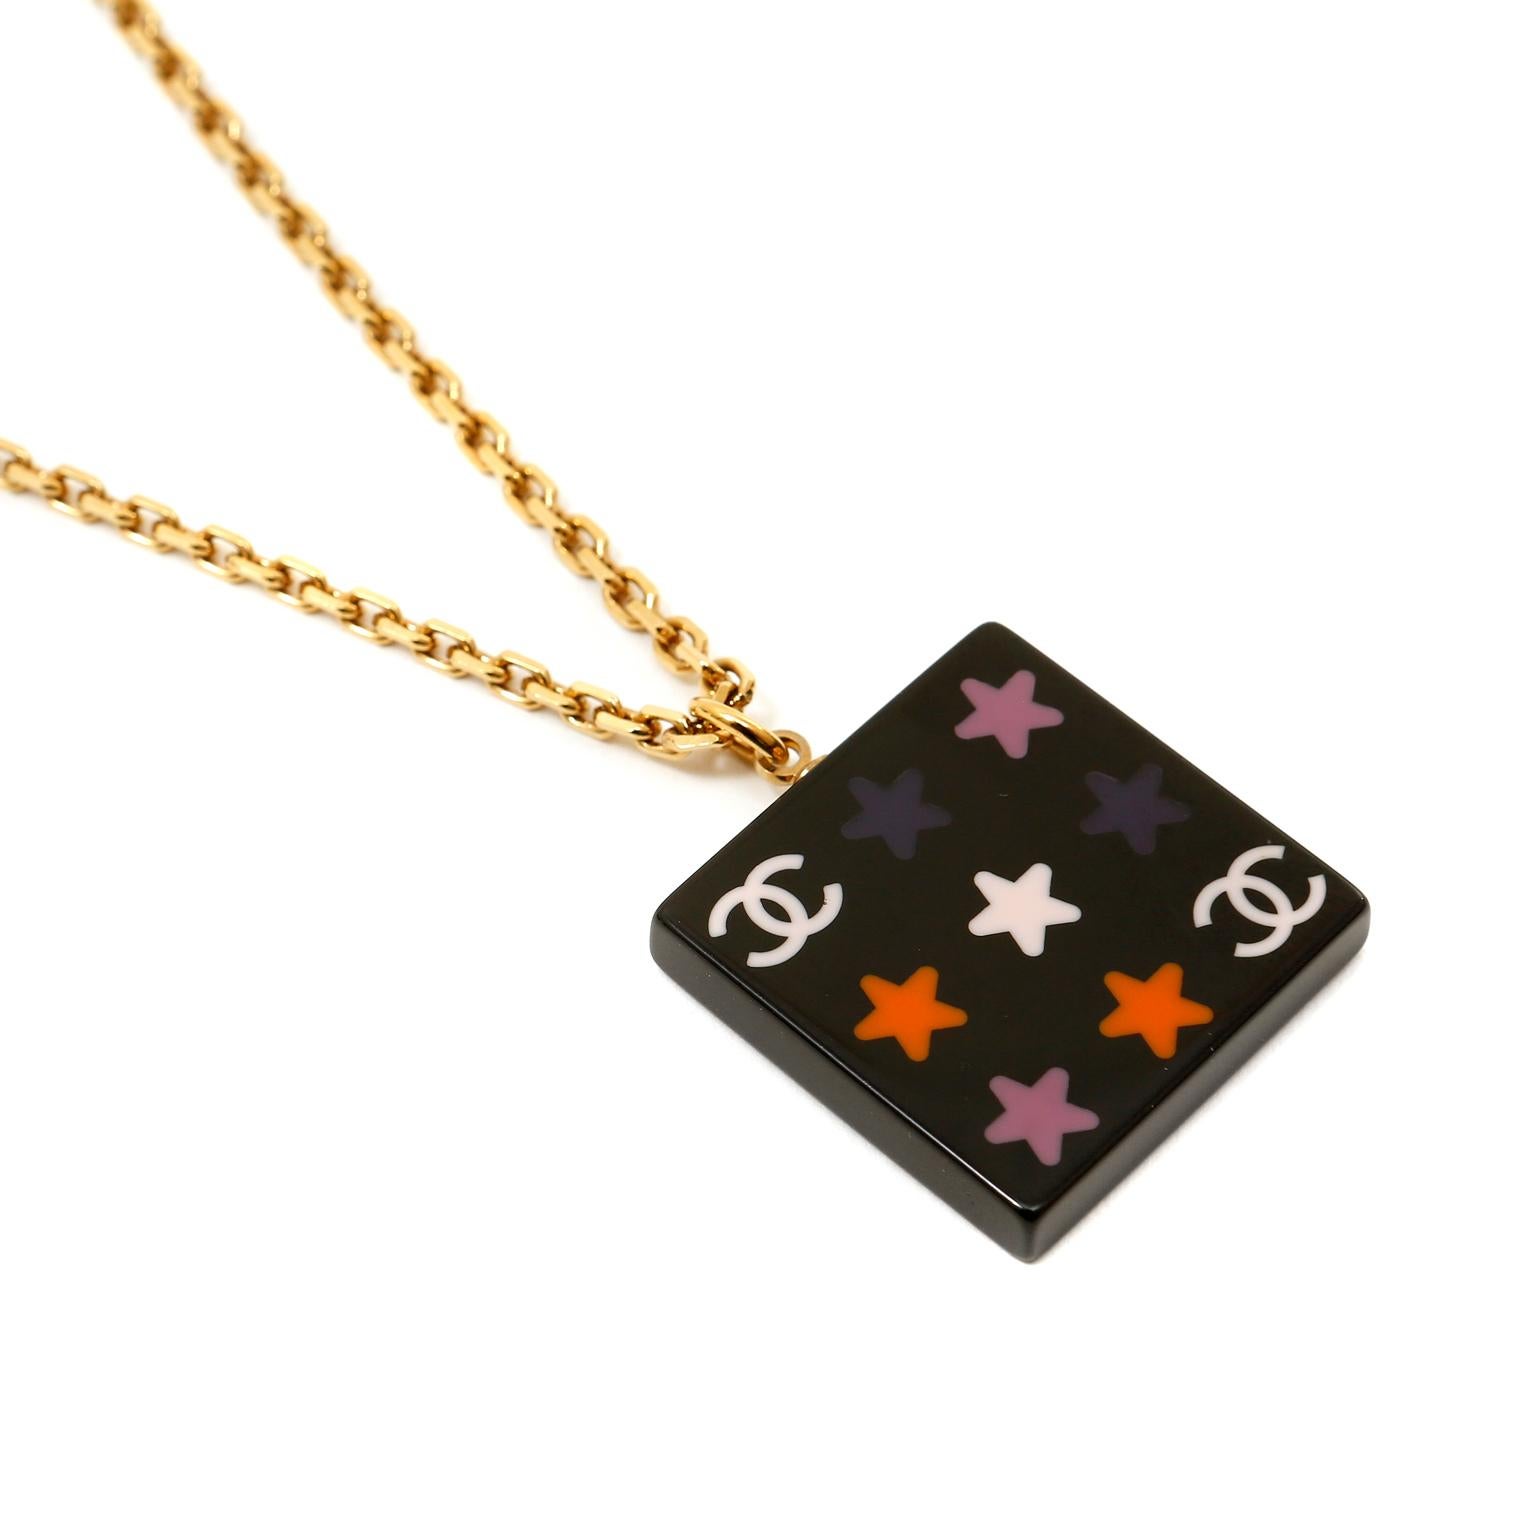 This authentic Chanel Black Resin Medallion Necklace is in excellent condition from the 2003 collection.  Black square resin medallion is covered in multicolor stars and interlocking CC emblems.  Suspended from an 18 karat gold plated linked chain,